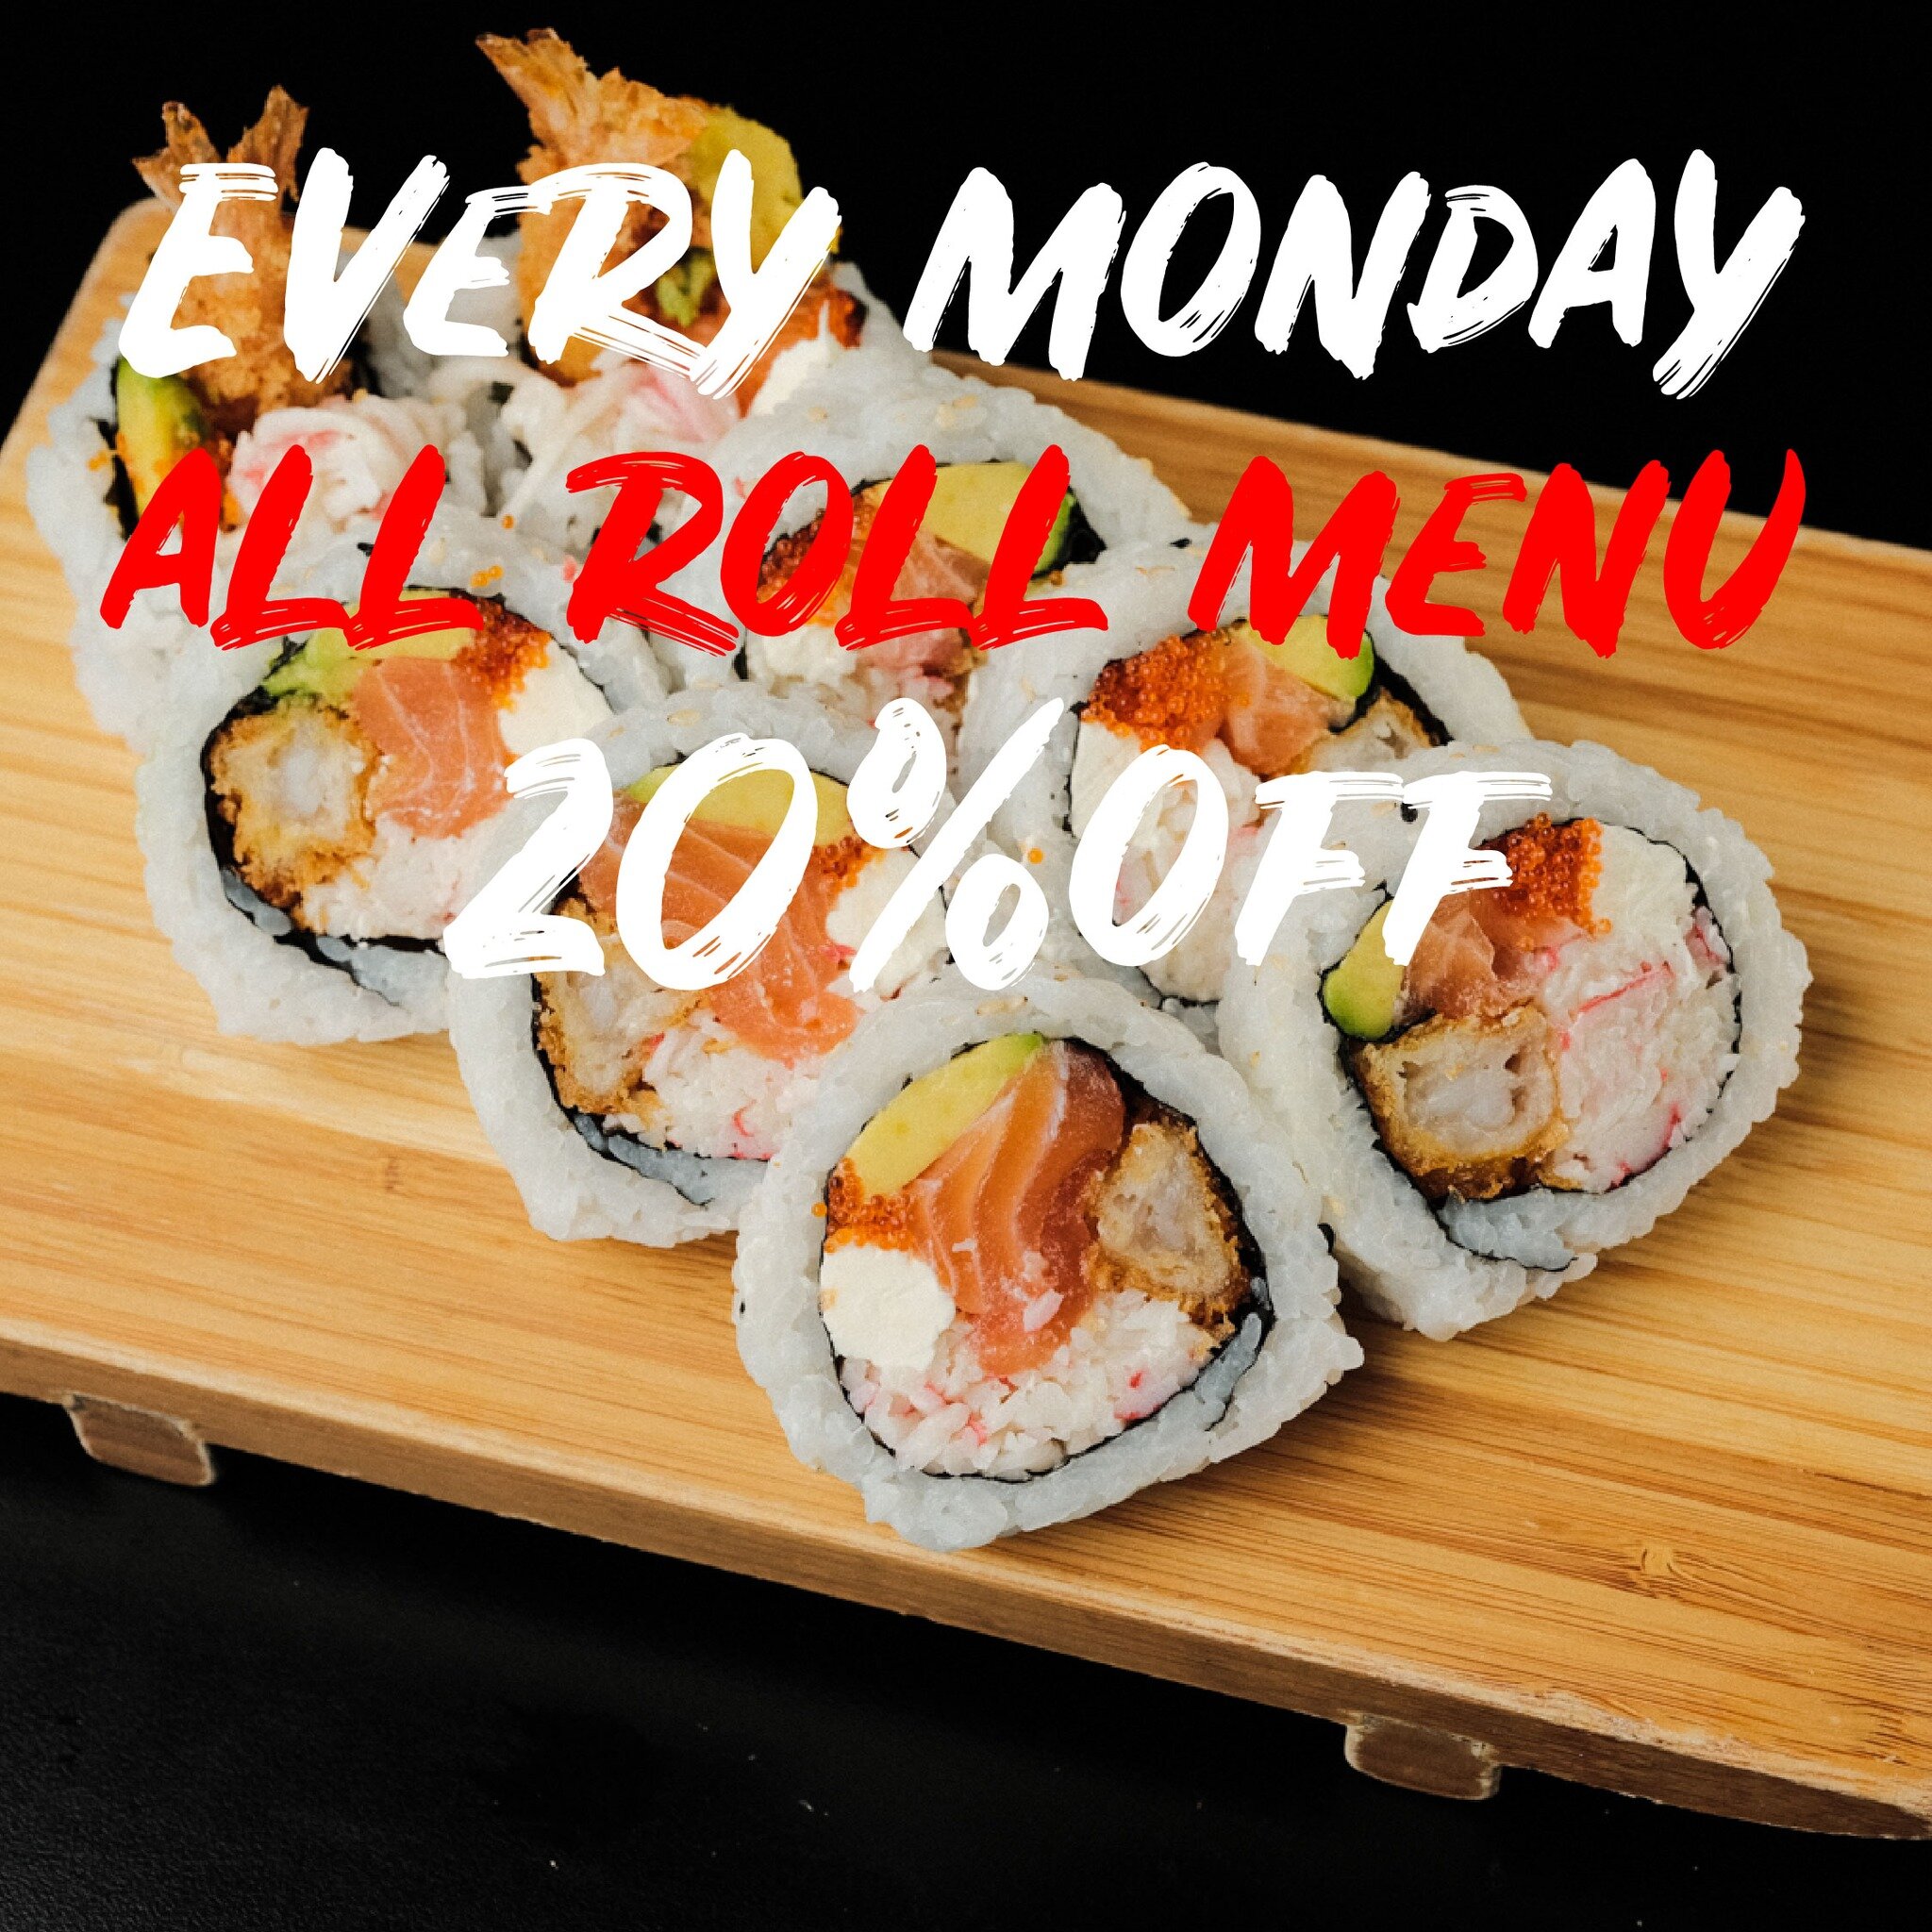 Our most popular menu items are now 20% off! Every Monday and Wednesday, you can save big on noodles, roll menu and donburi. So come on down and enjoy a delicious meal at SAKANA JAPANESE DINING BAR. 😍 #sakanaclayfield 

Sakana Japanese Dining bar

1